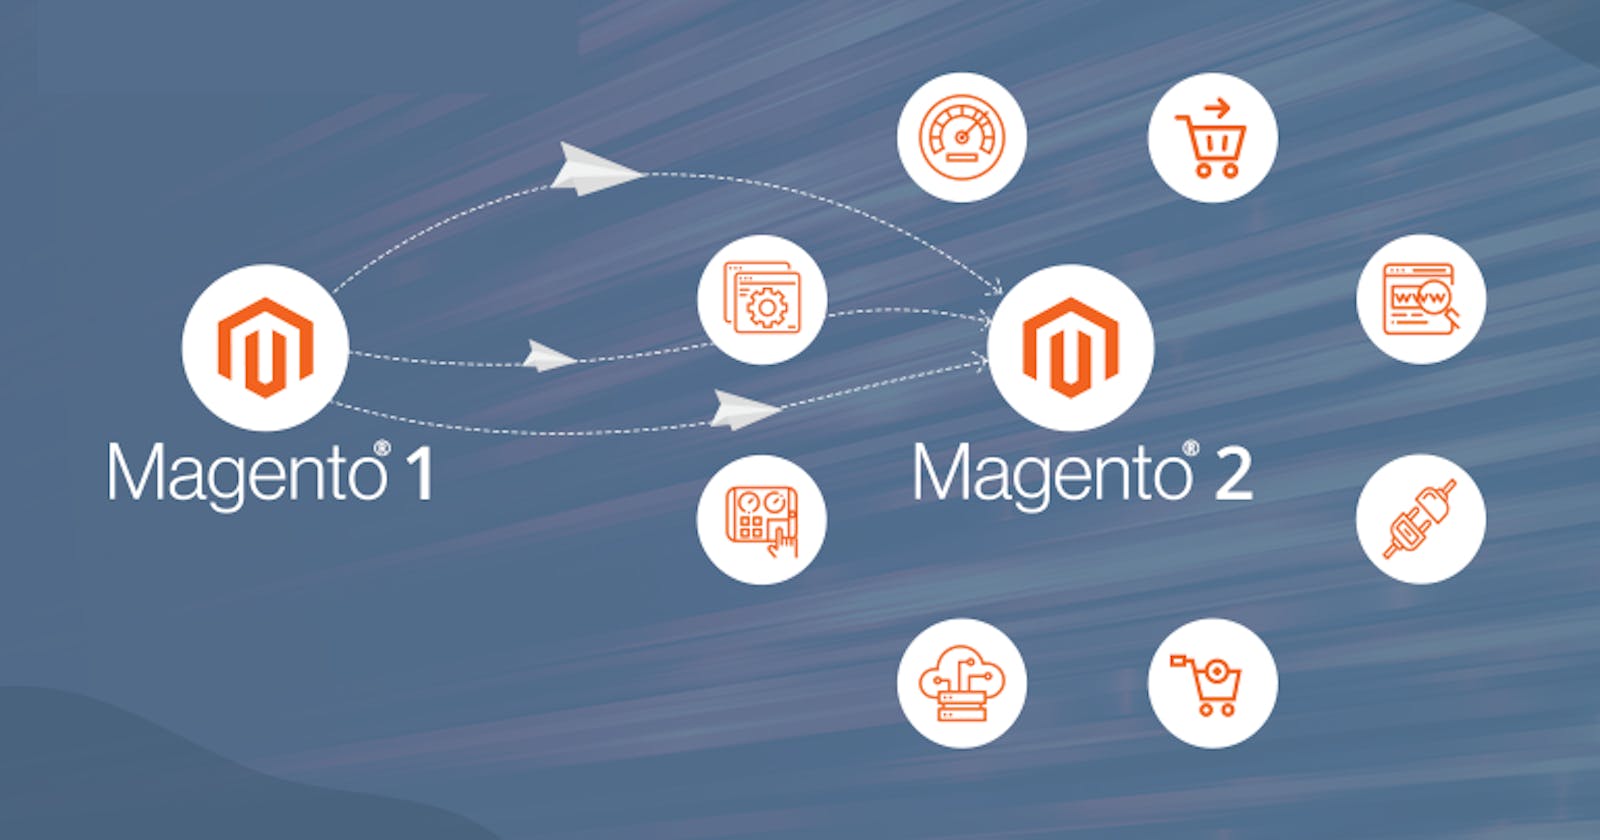 11 Reasons To Choose Magento 2 For eCommerce Development In 2022